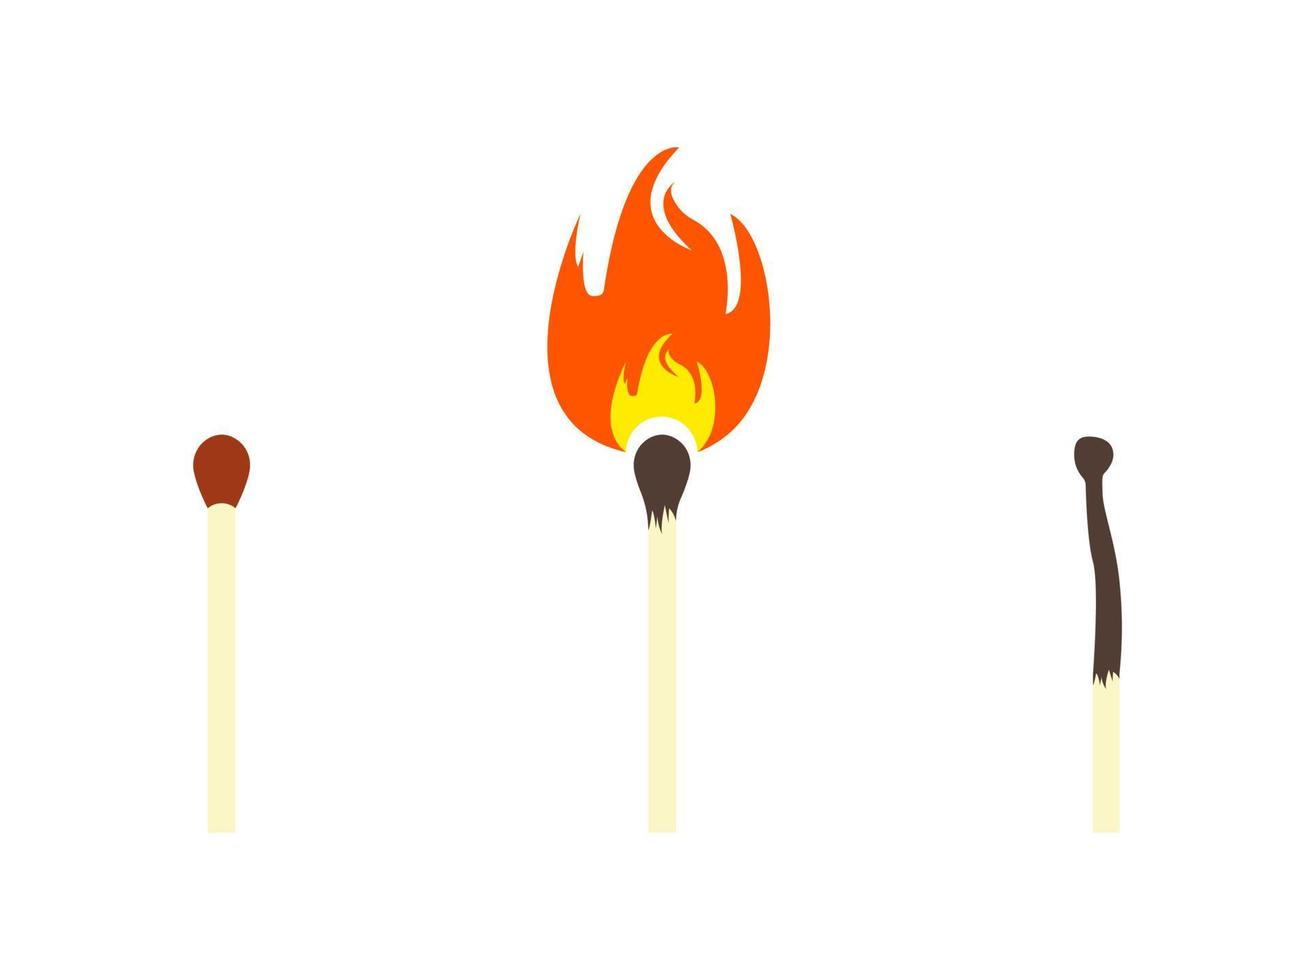 Safety match, lighted match and burnt match icons. Burnout syndrome. Working burnout conception. Vector